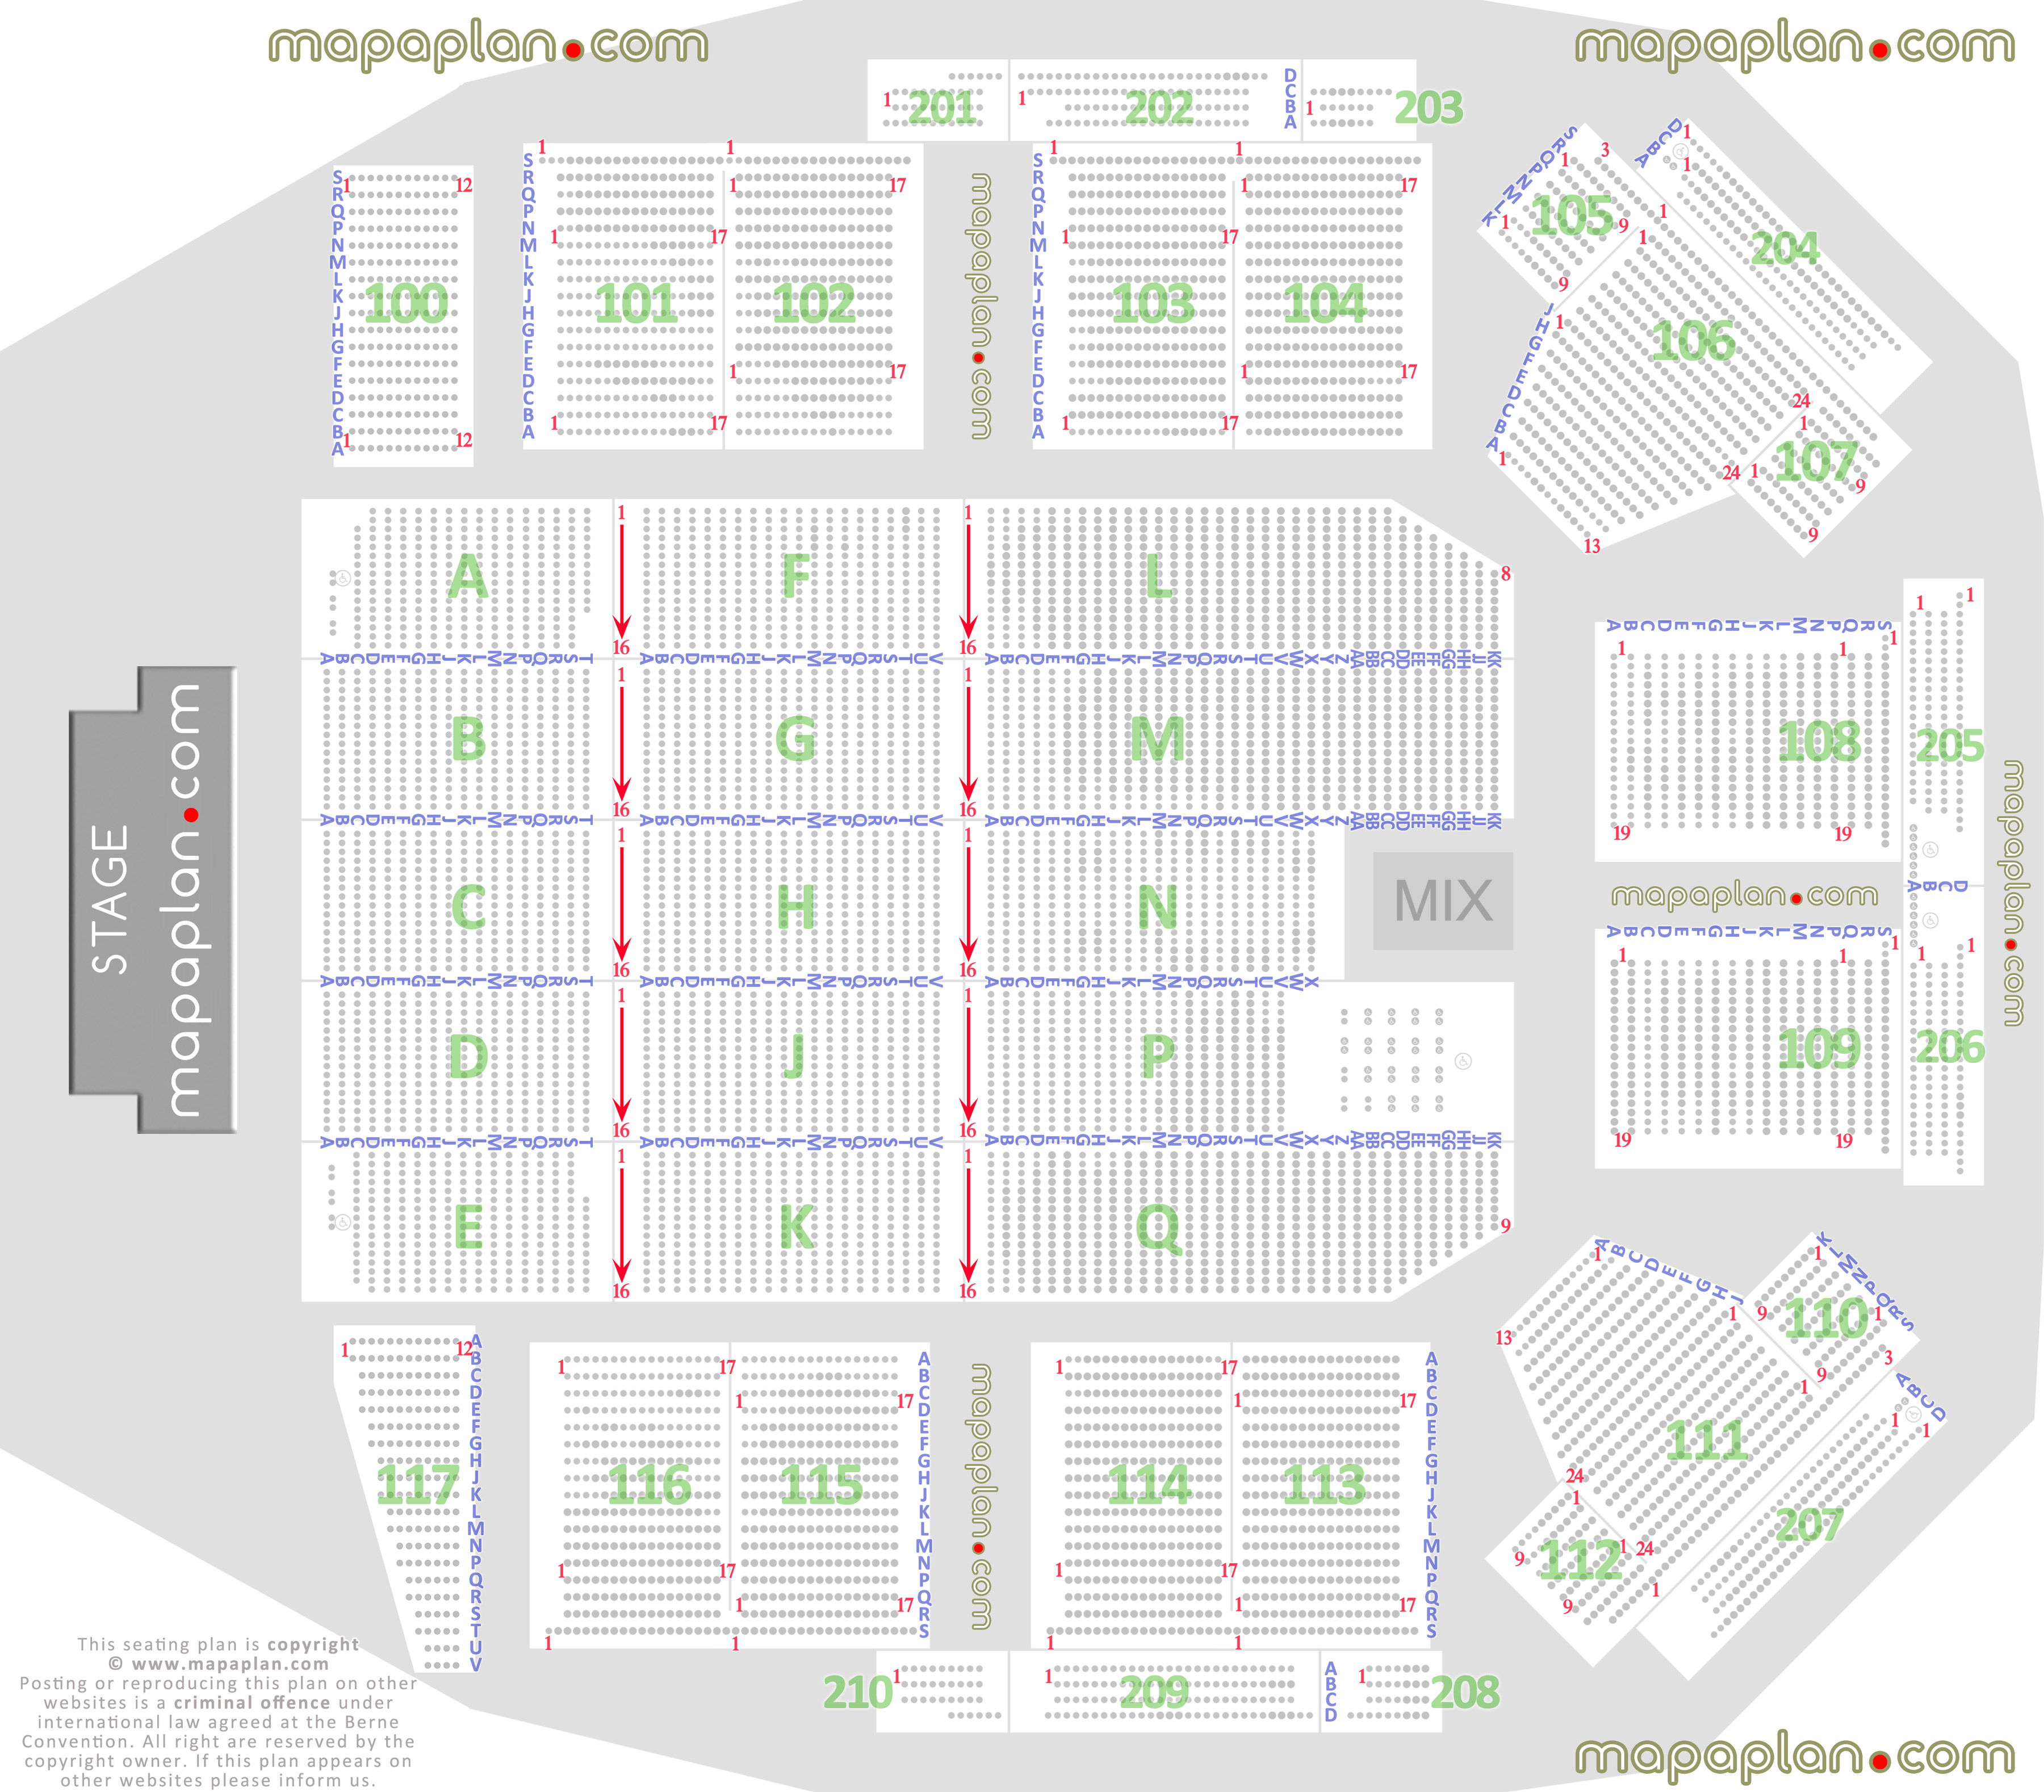 Aberdeen P&J Live seating plan detailed seat row numbers concert sections floor plan arena layout